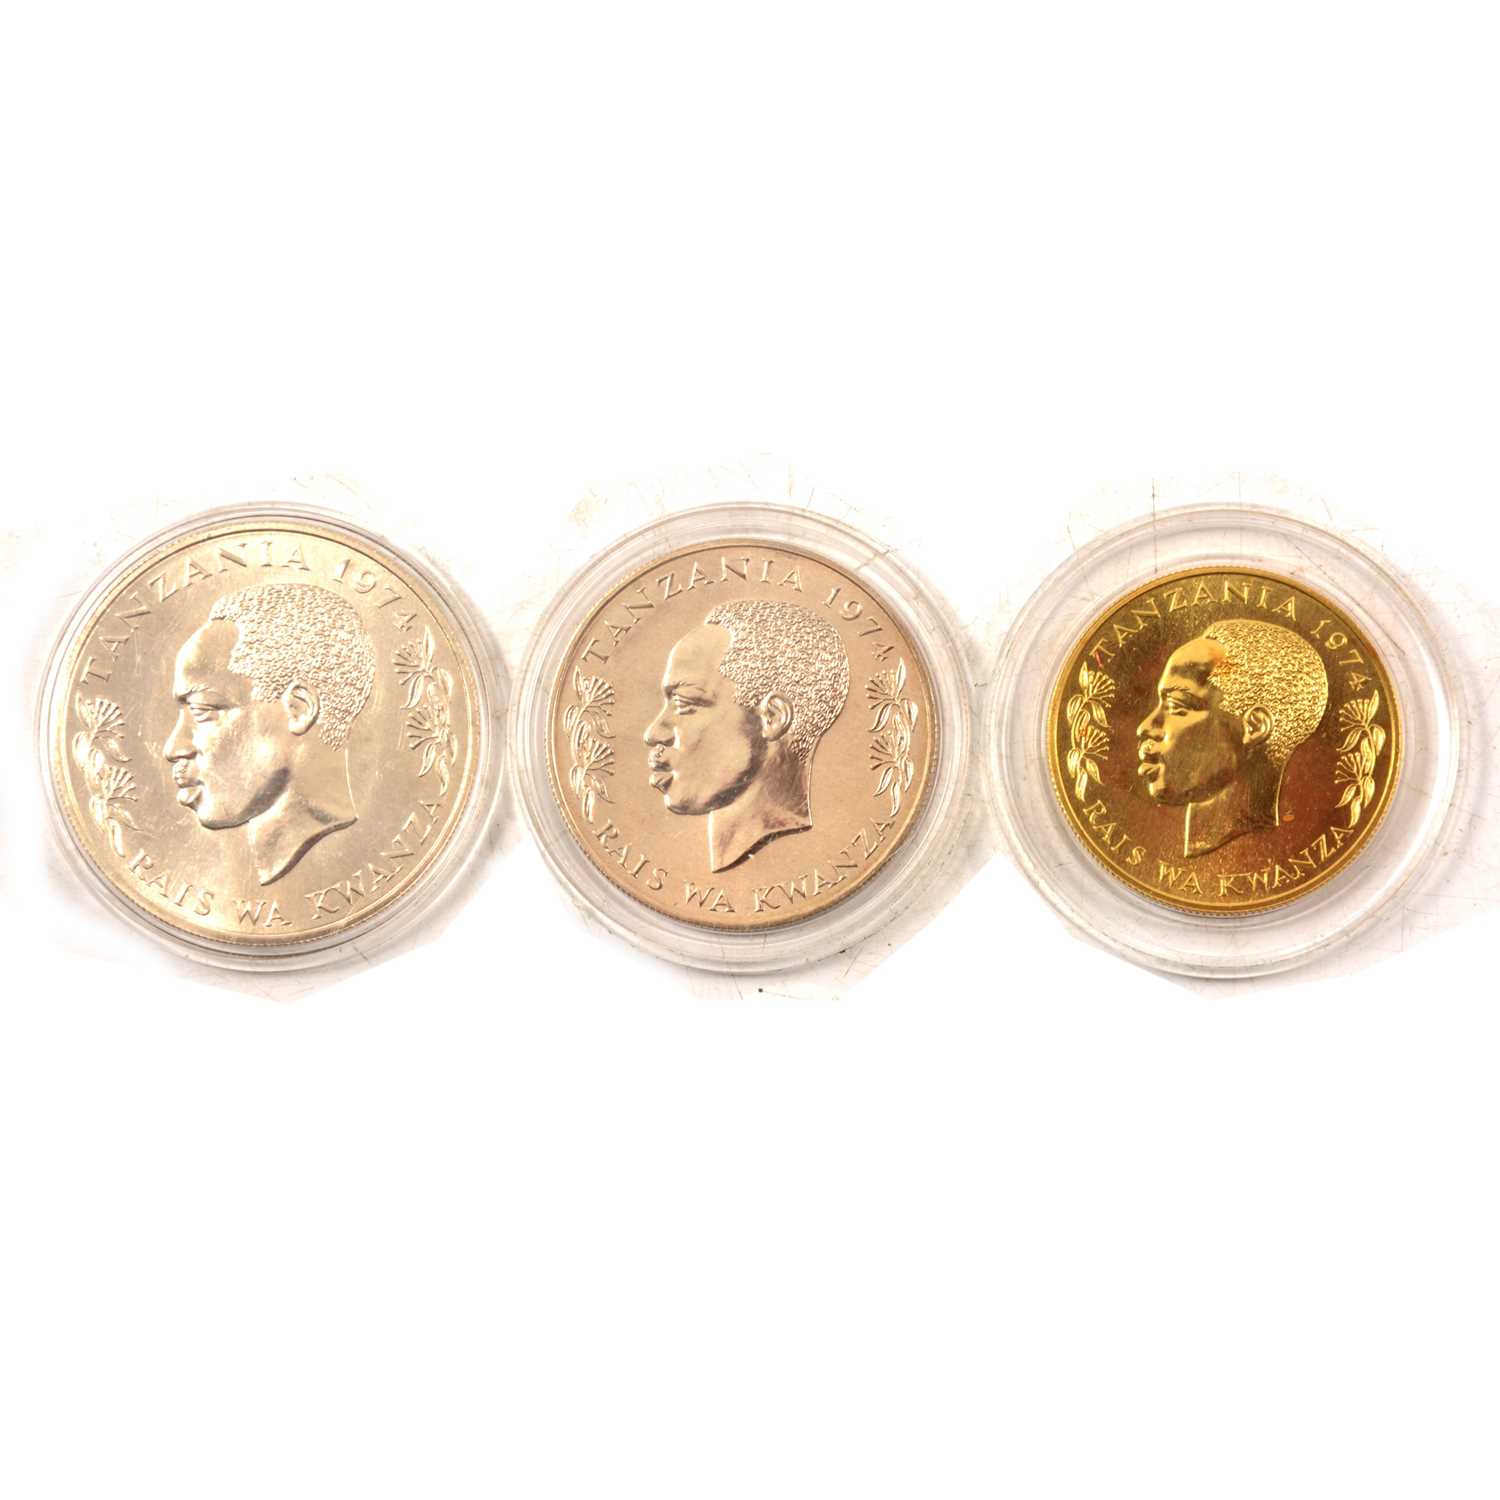 Royal Mint & WWF Conservation gold and silver three coin set, Tanzania, 1974,